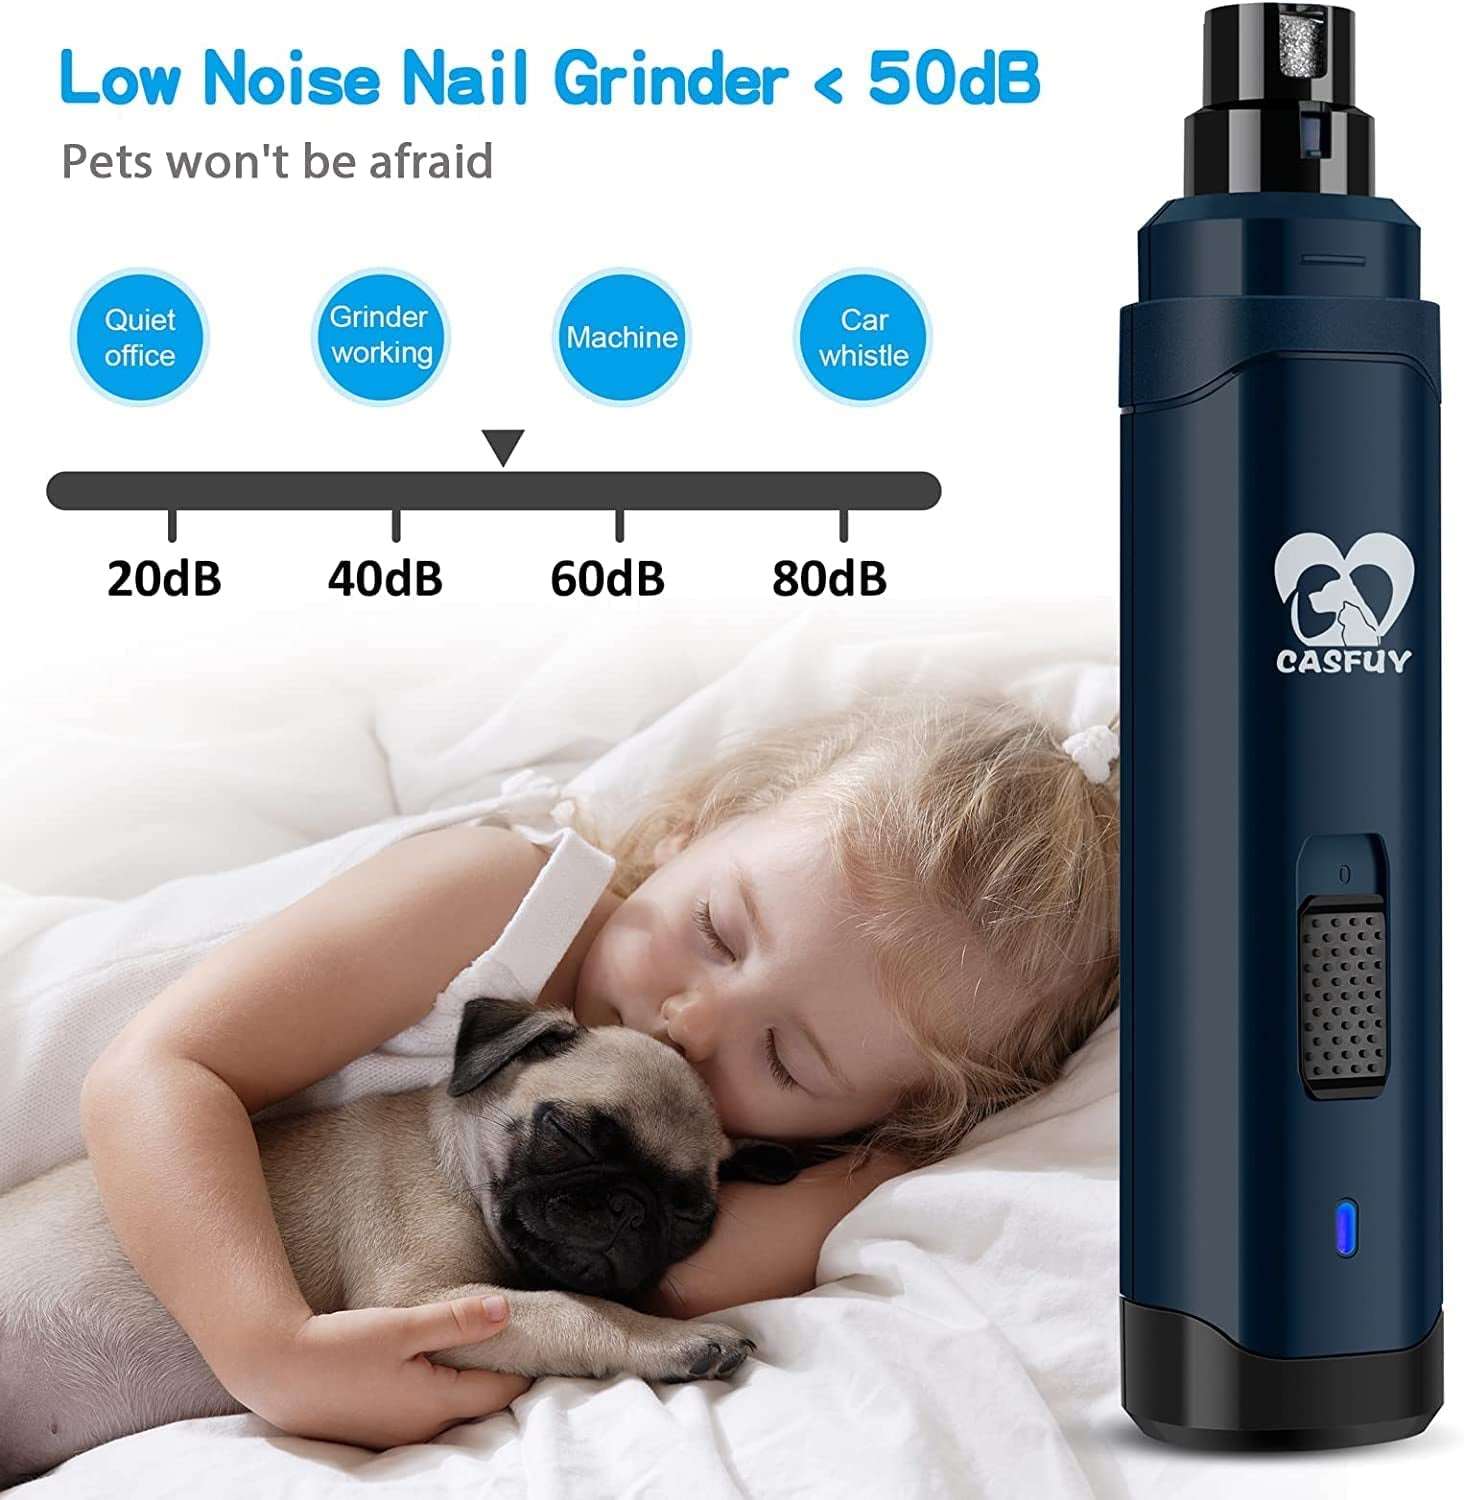 Dog Nail Grinder Upgraded - Professional 2-Speed Electric Rechargeable Pet Nail Trimmer Painless Paws